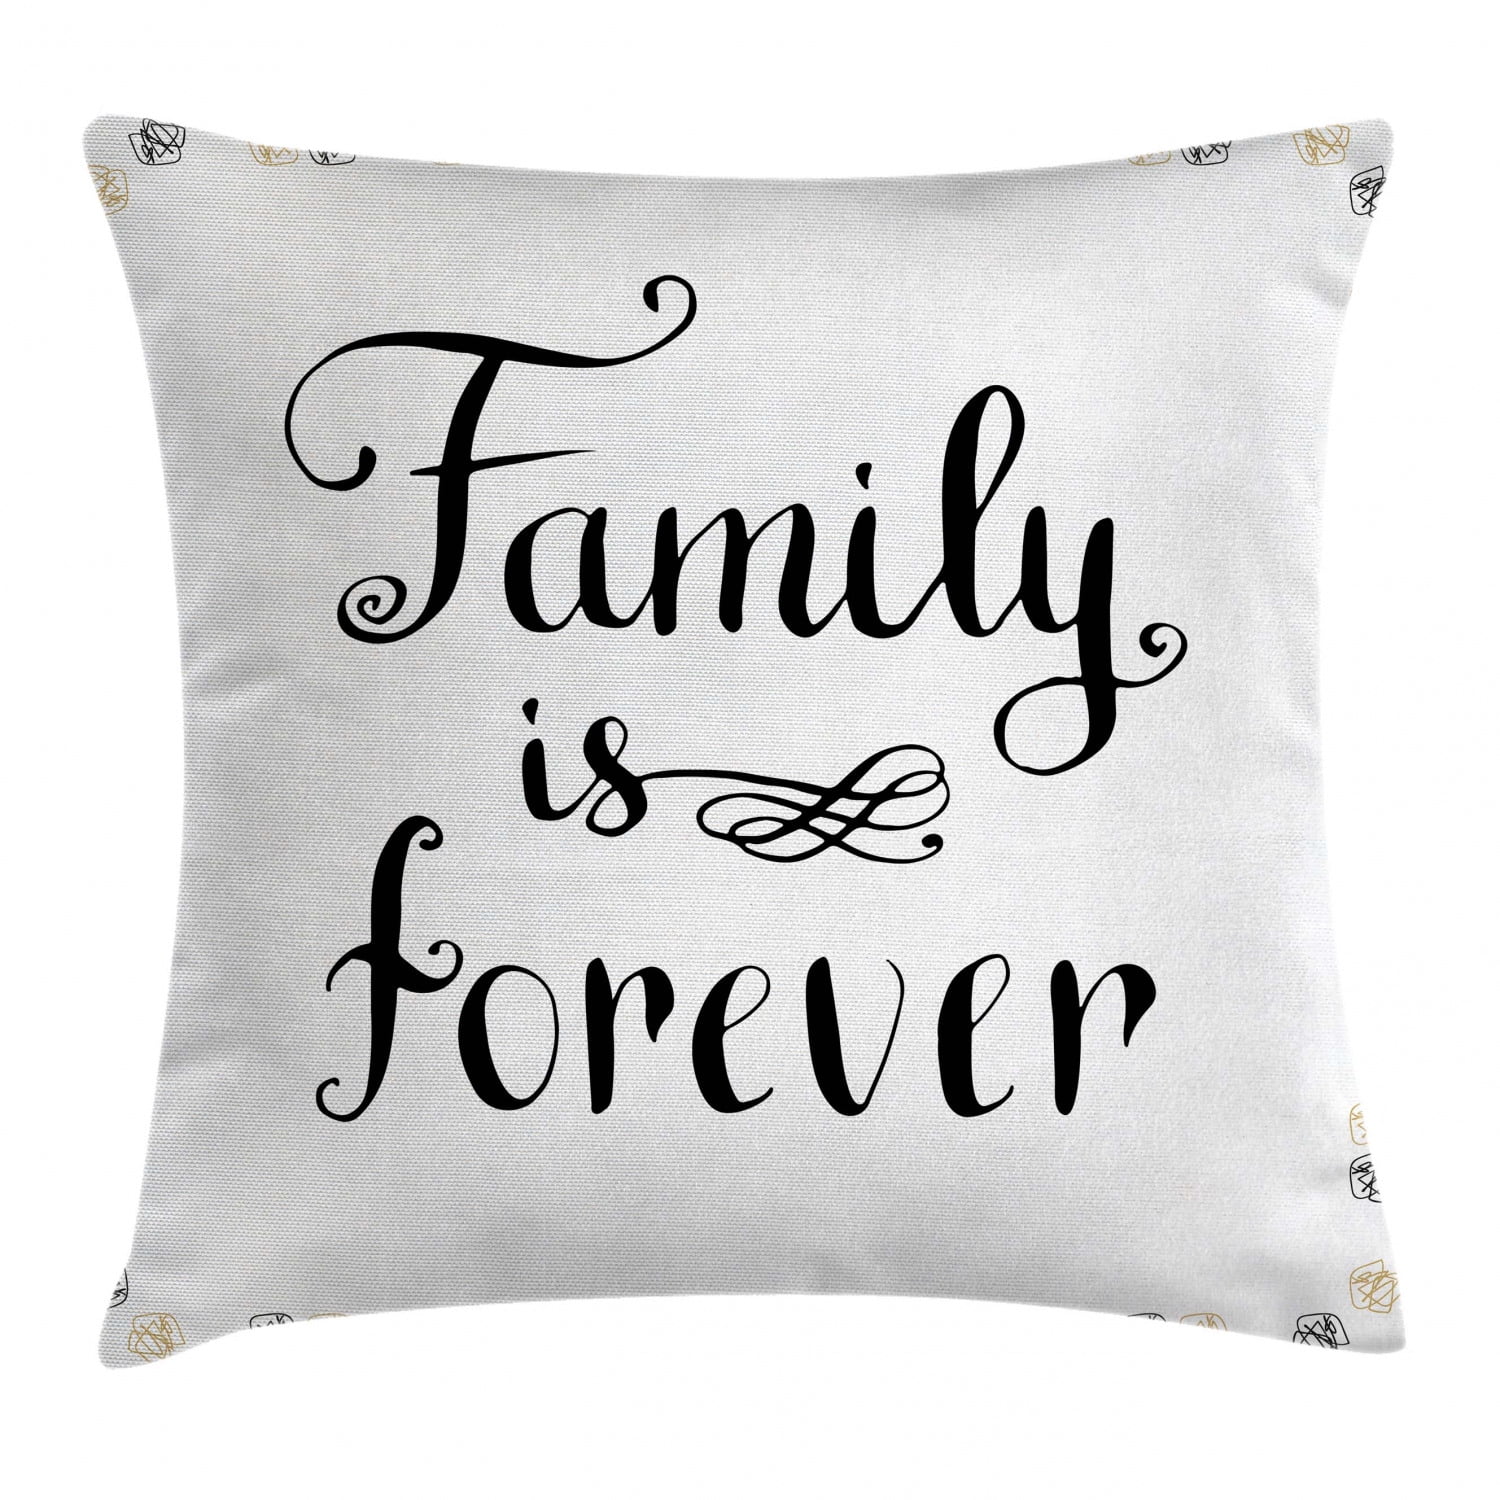 Custom Personalized 1PCS Pillow Case/Cushion Cover Your Image/Photo Here Gift 